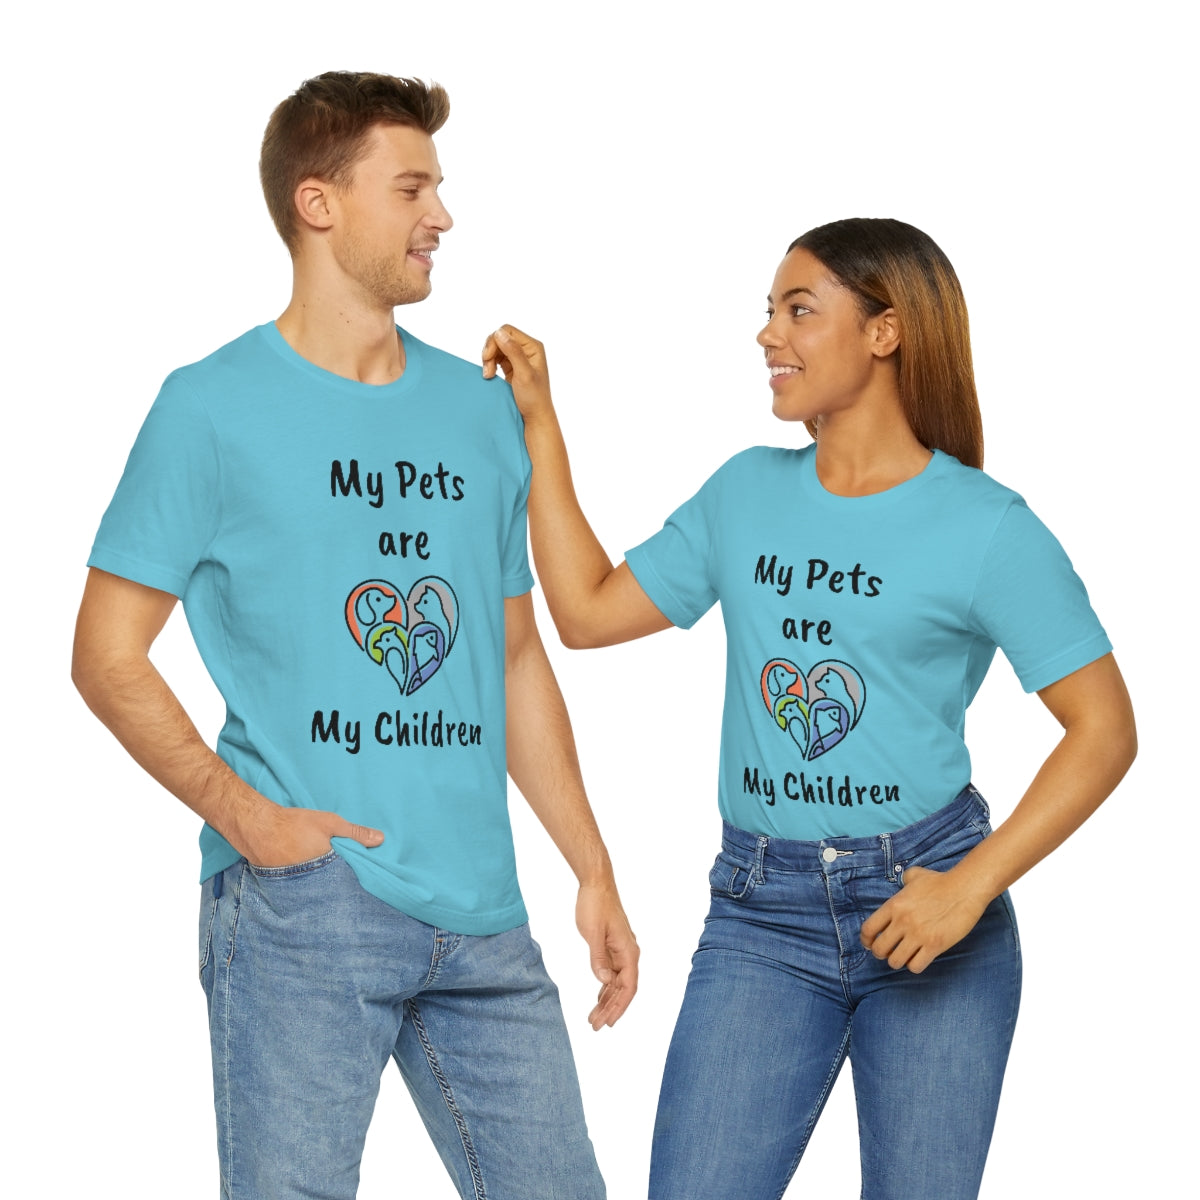 My pets are my children - Funny - Unisex Short Sleeve Tee